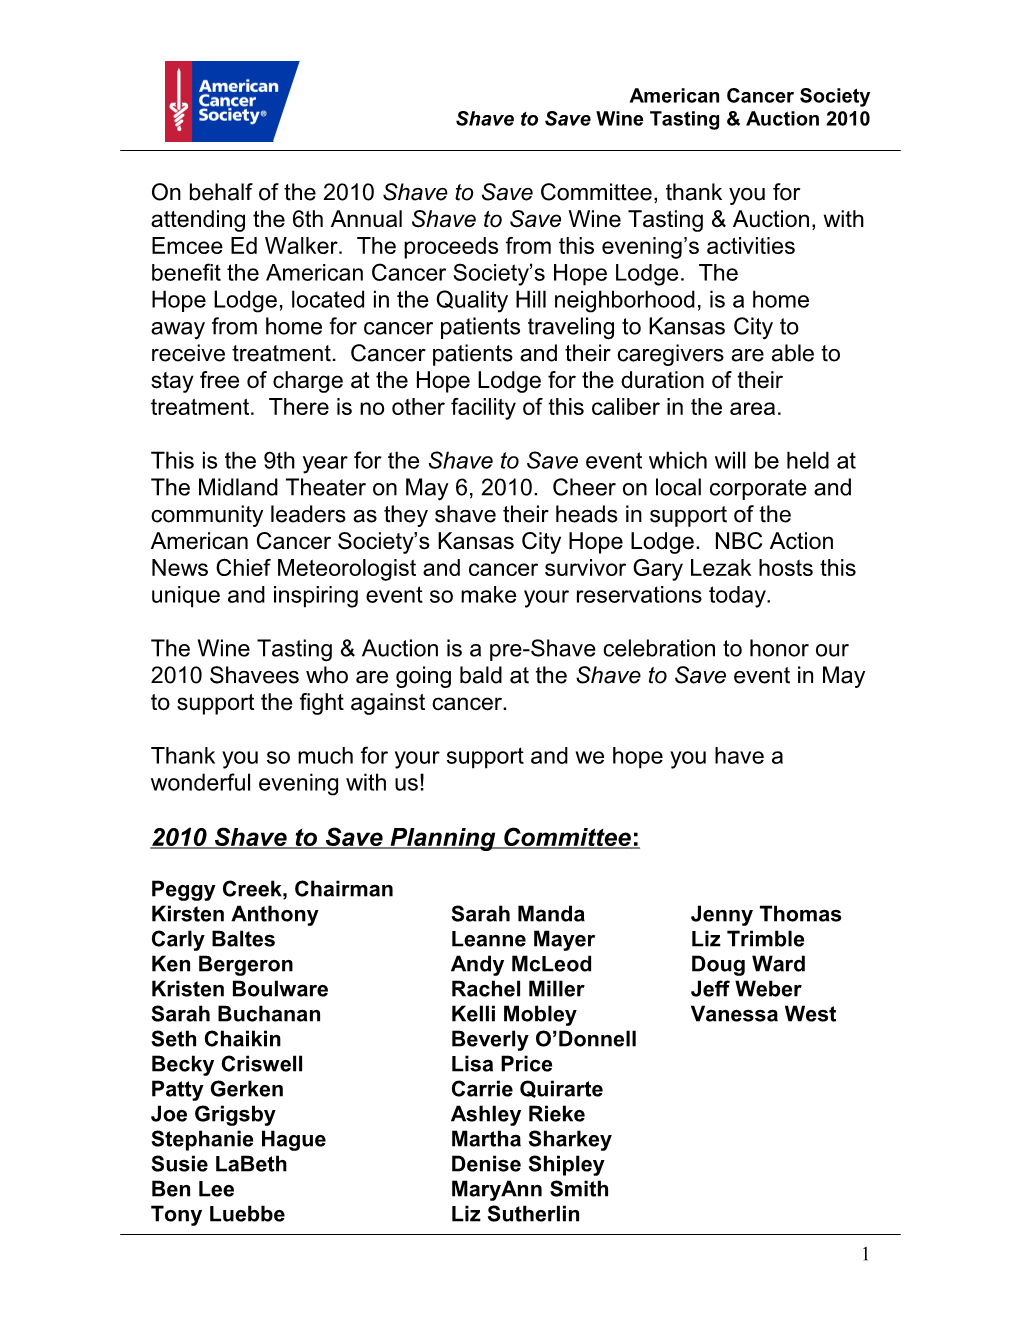 On Behalf Of The Shave To Save Committee, Thank You For Attending The 2Nd Annual Shave To Save Wine Tasting & Auction